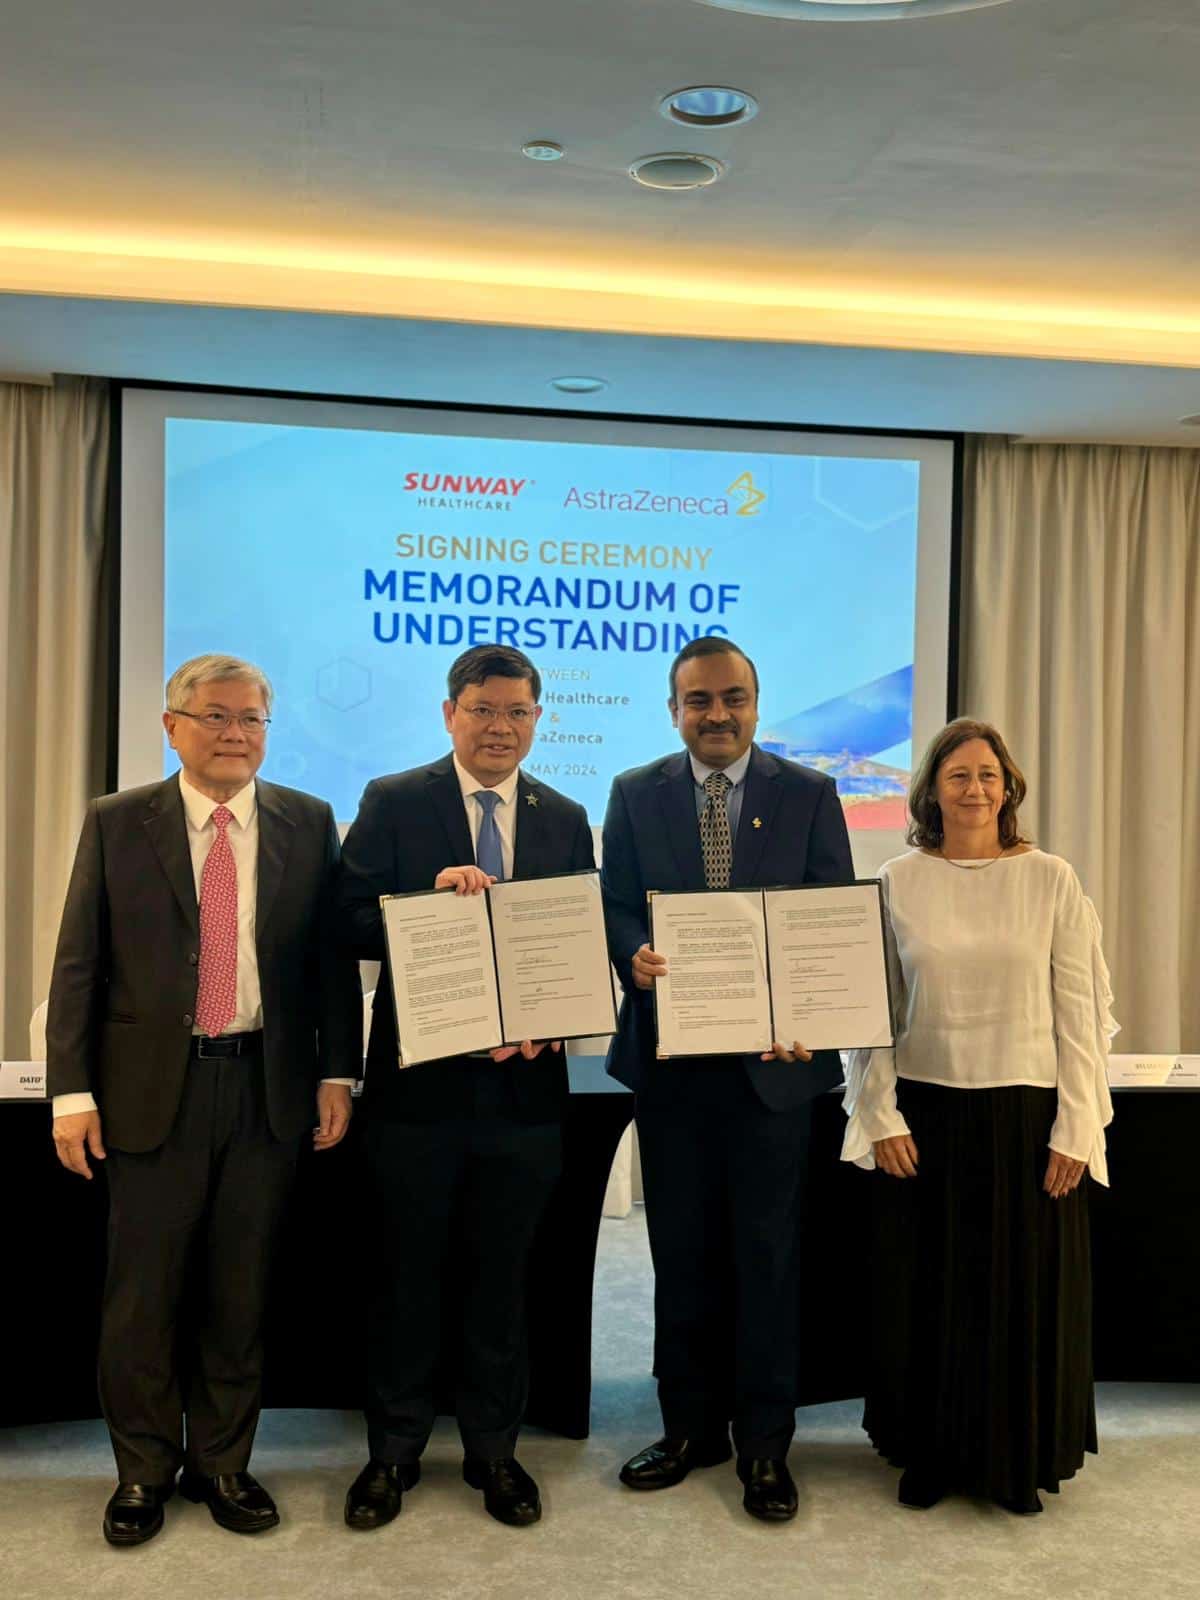 Sunway Healthcare Group Leads As First Malaysian Private Healthcare Group to Collaborate With AstraZeneca on Improving Healthcare Access and Delivery